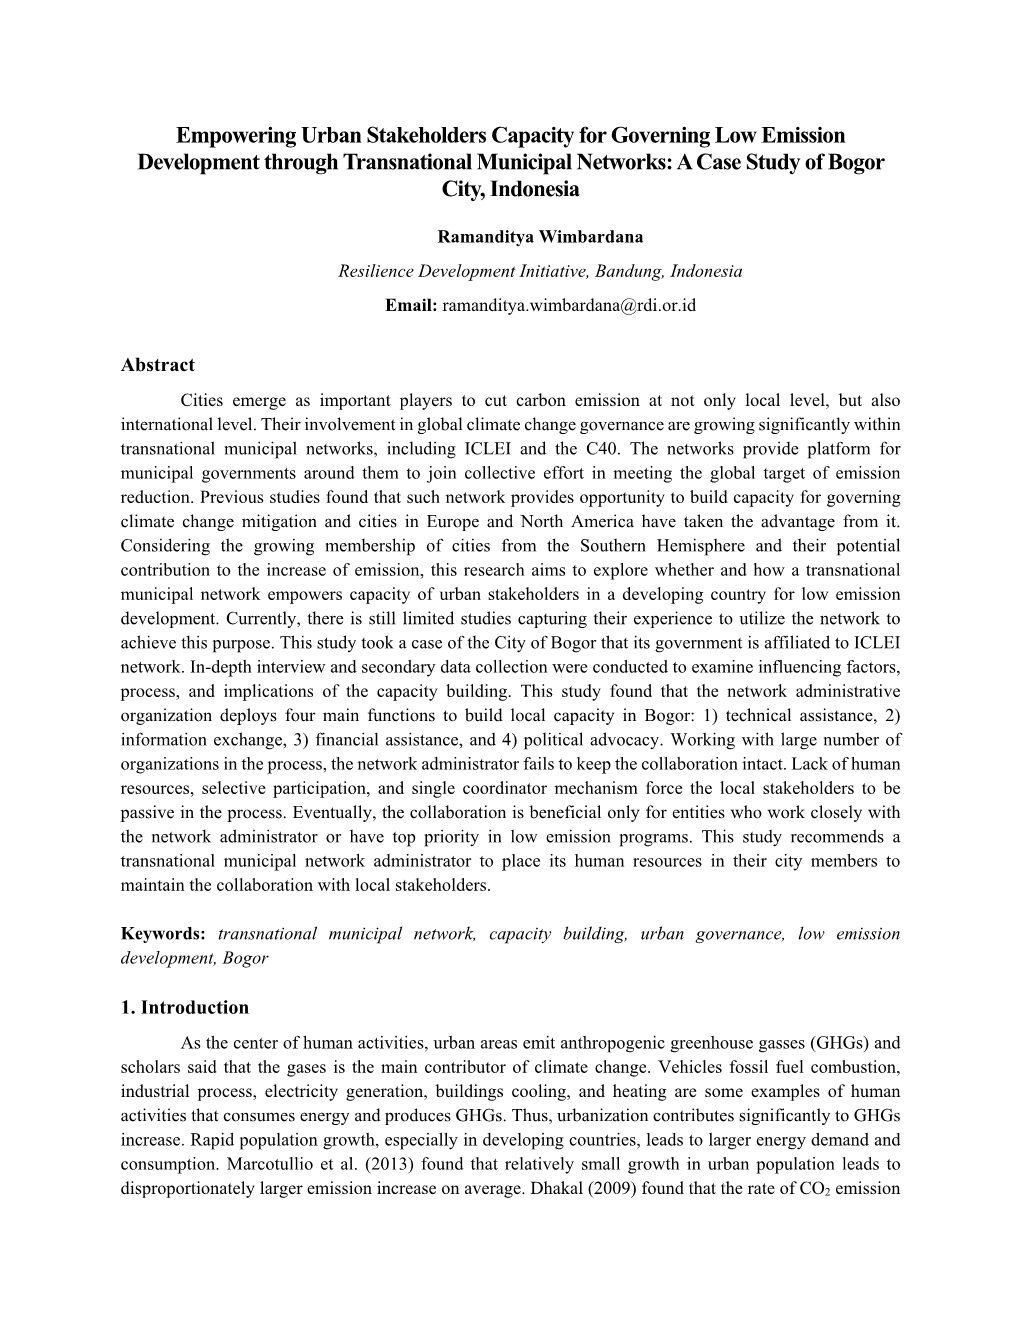 Empowering Urban Stakeholders Capacity for Governing Low Emission Development Through Transnational Municipal Networks: a Case Study of Bogor City, Indonesia